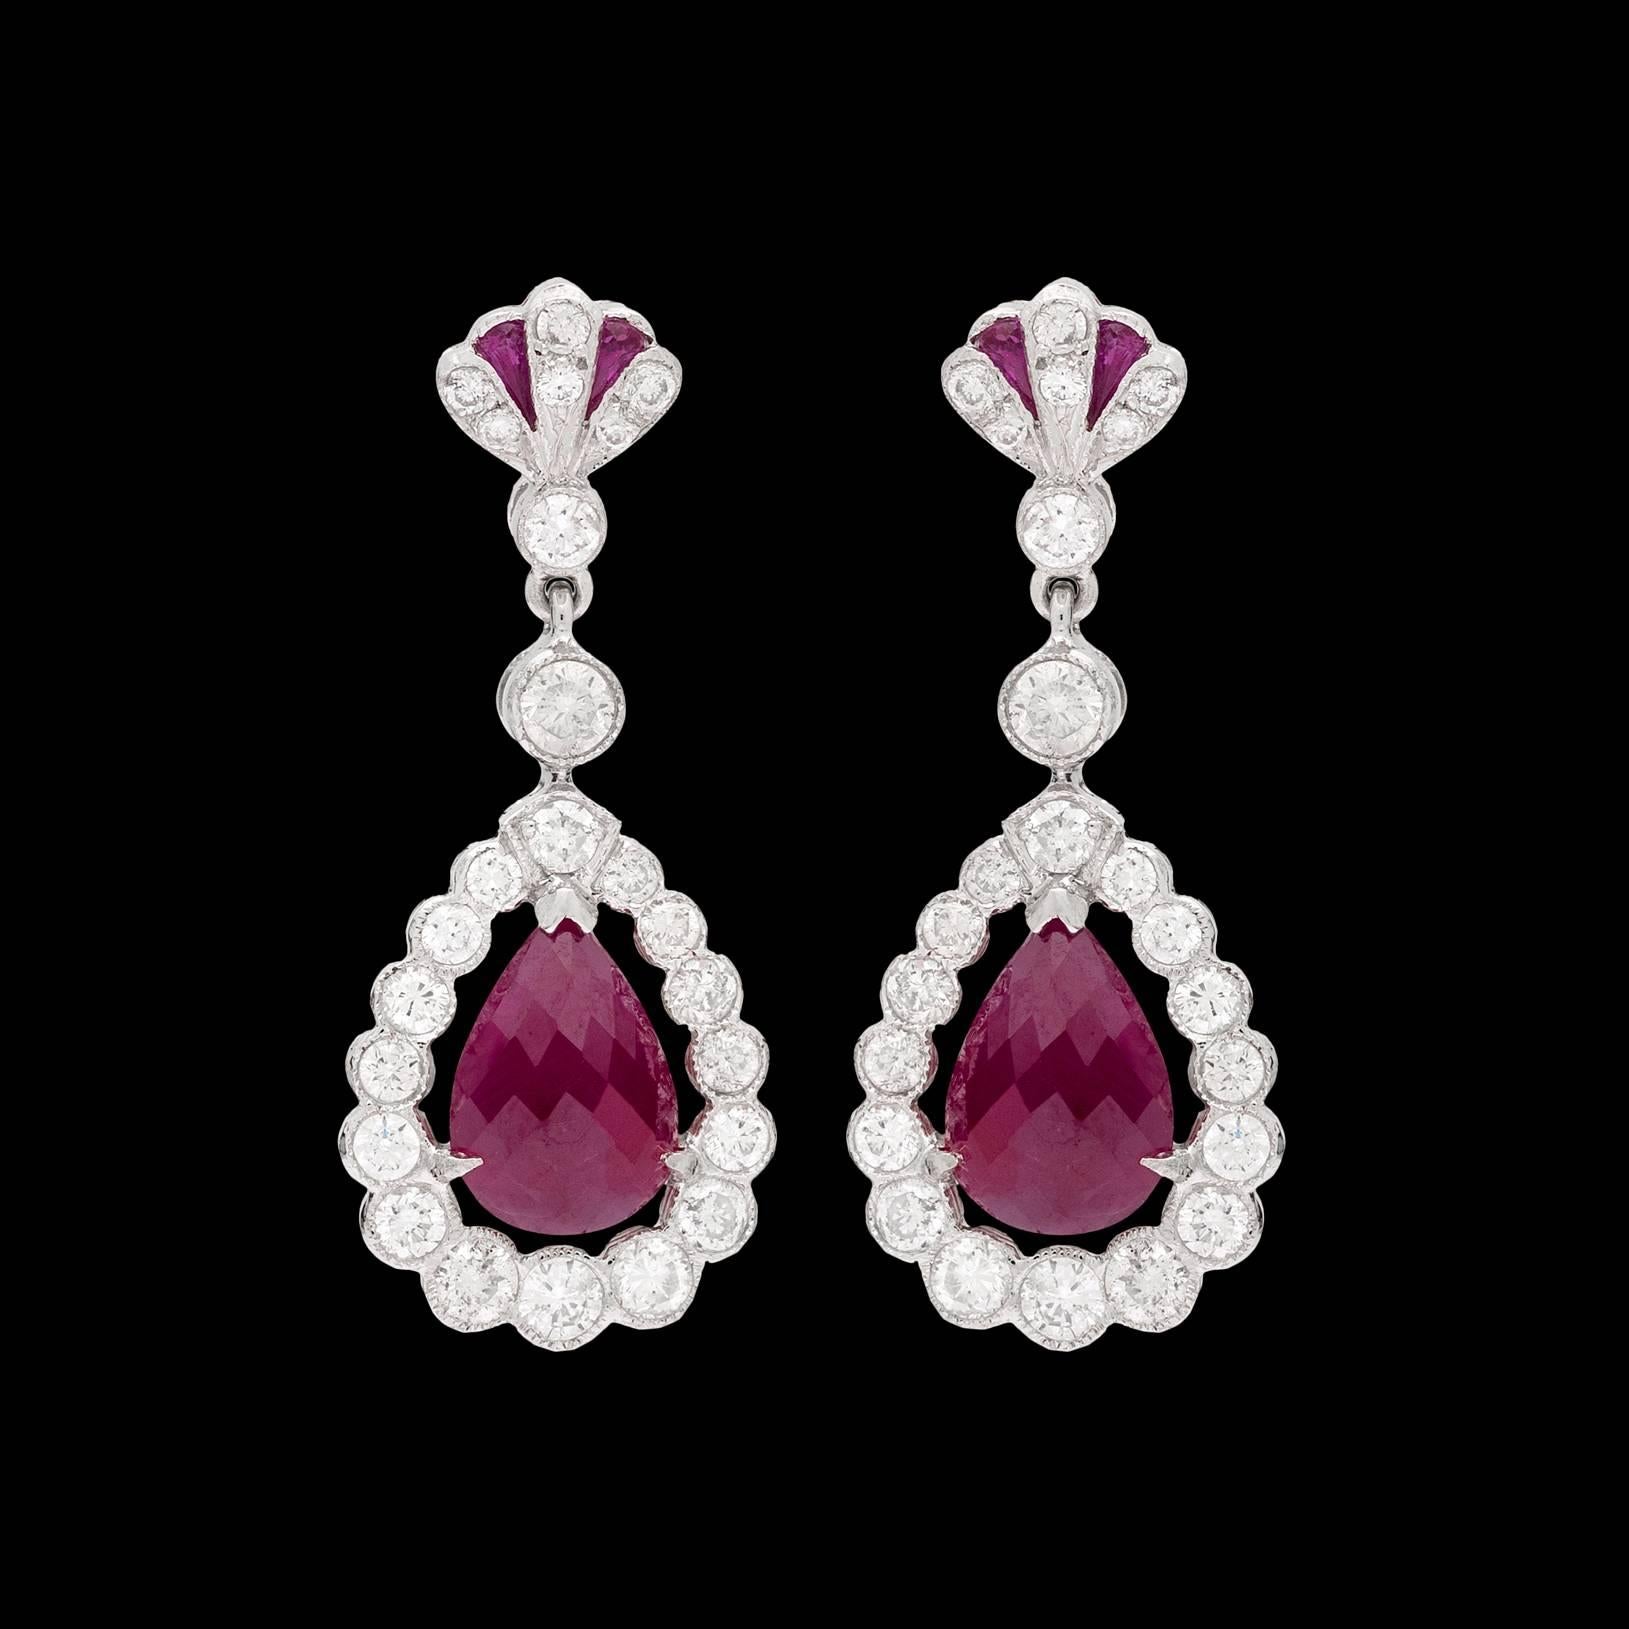 18k white gold dangle earrings features teardrop briolette cut rubies from Burma for a total of 3.45 carats. The surrounding diamonds totals 1.39 carats. At the top of the earring measuring 1.13″ drop are accent calbre cut rubies. Total weight of